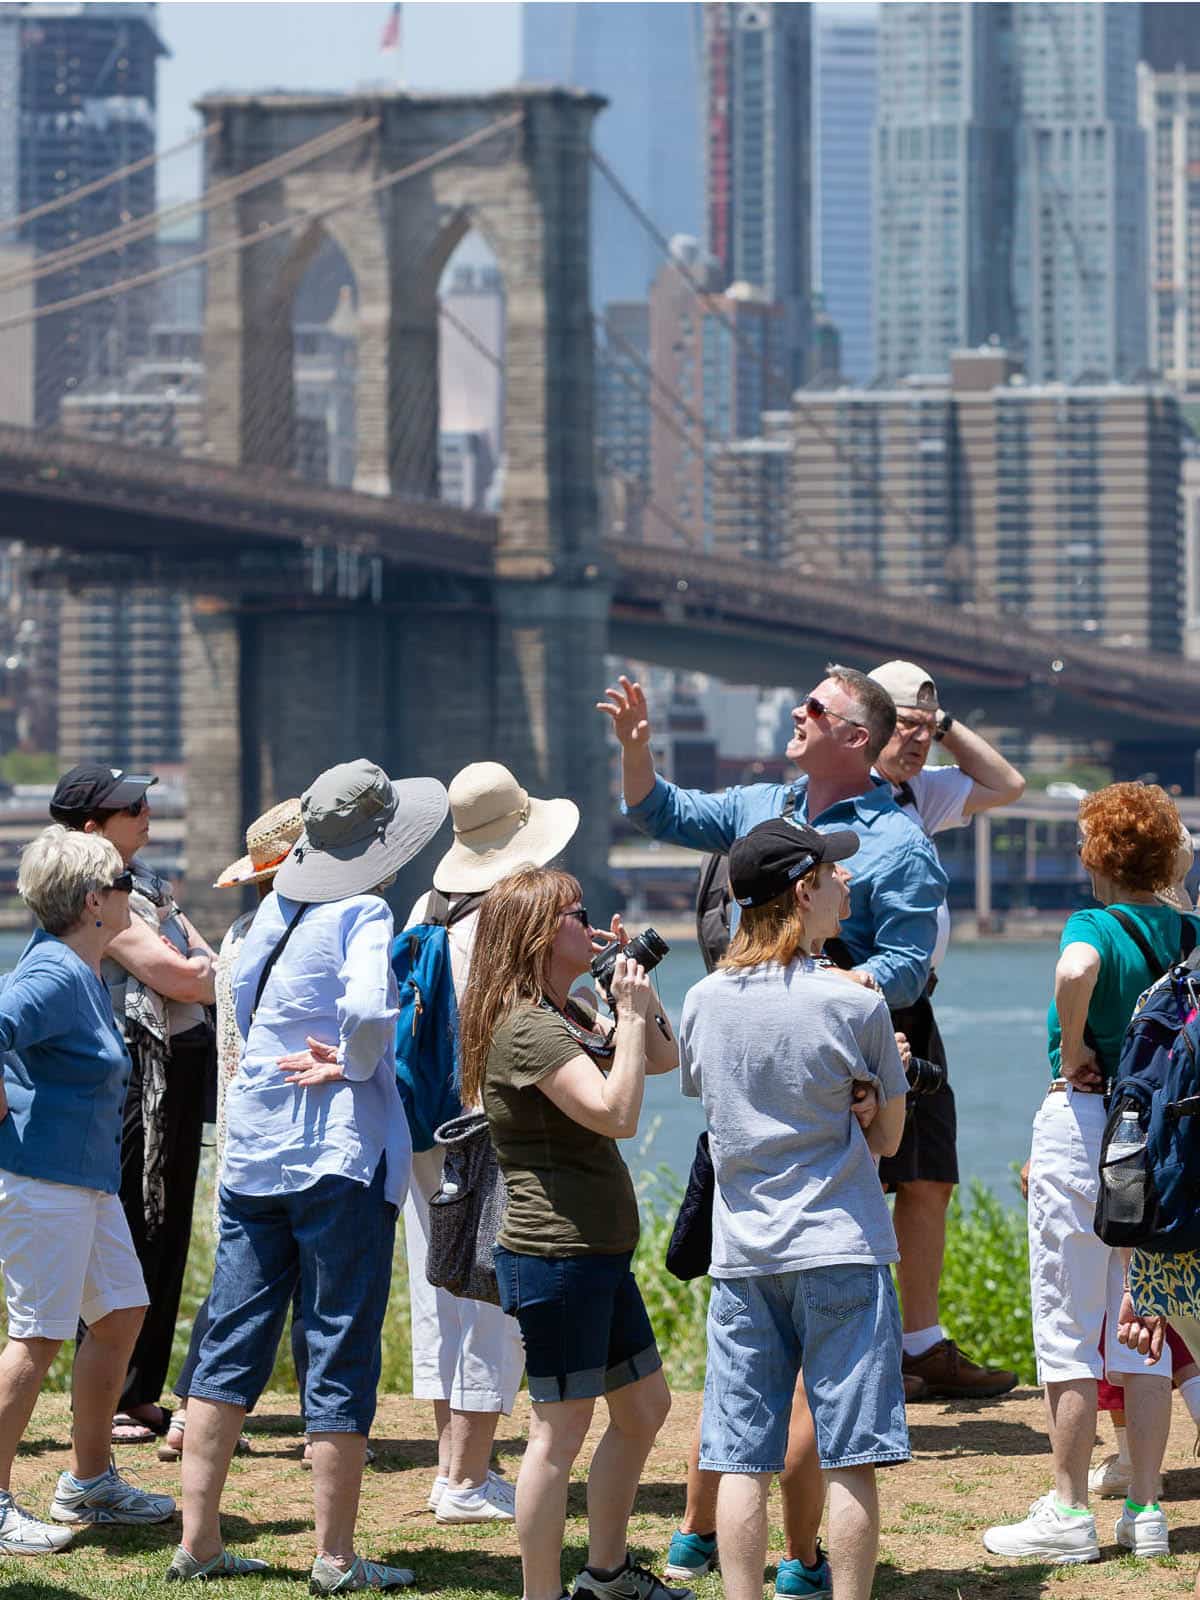 Tour guide points up in front of group with the Brooklyn Bridge in the background.